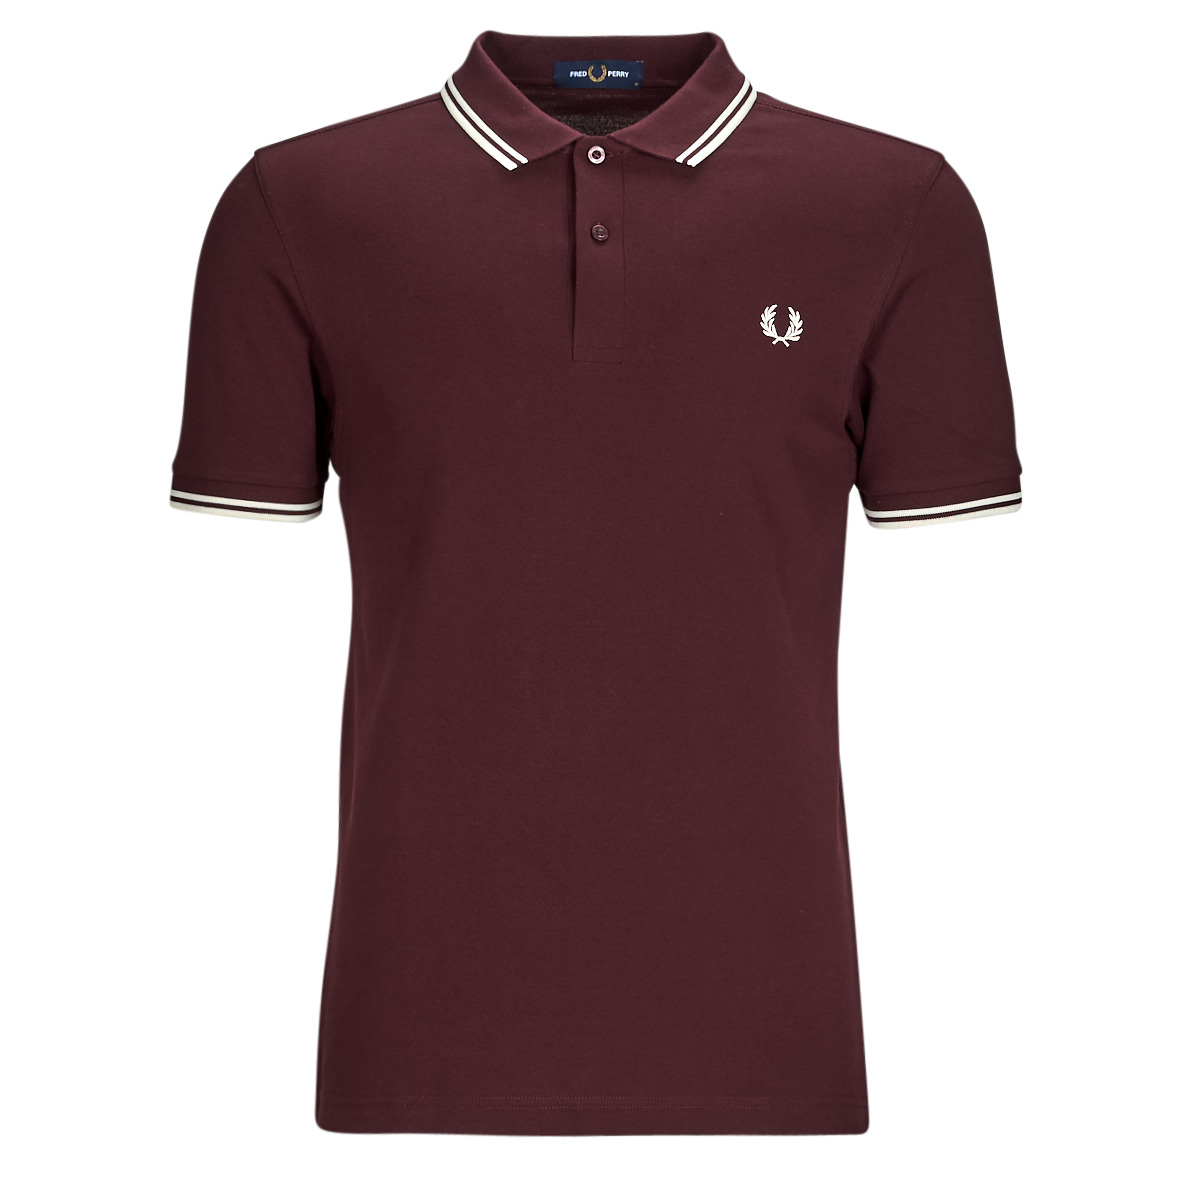 Fred Perry Bordeaux TWIN TIPPED FRED PERRY SHIRT hL6wNovN